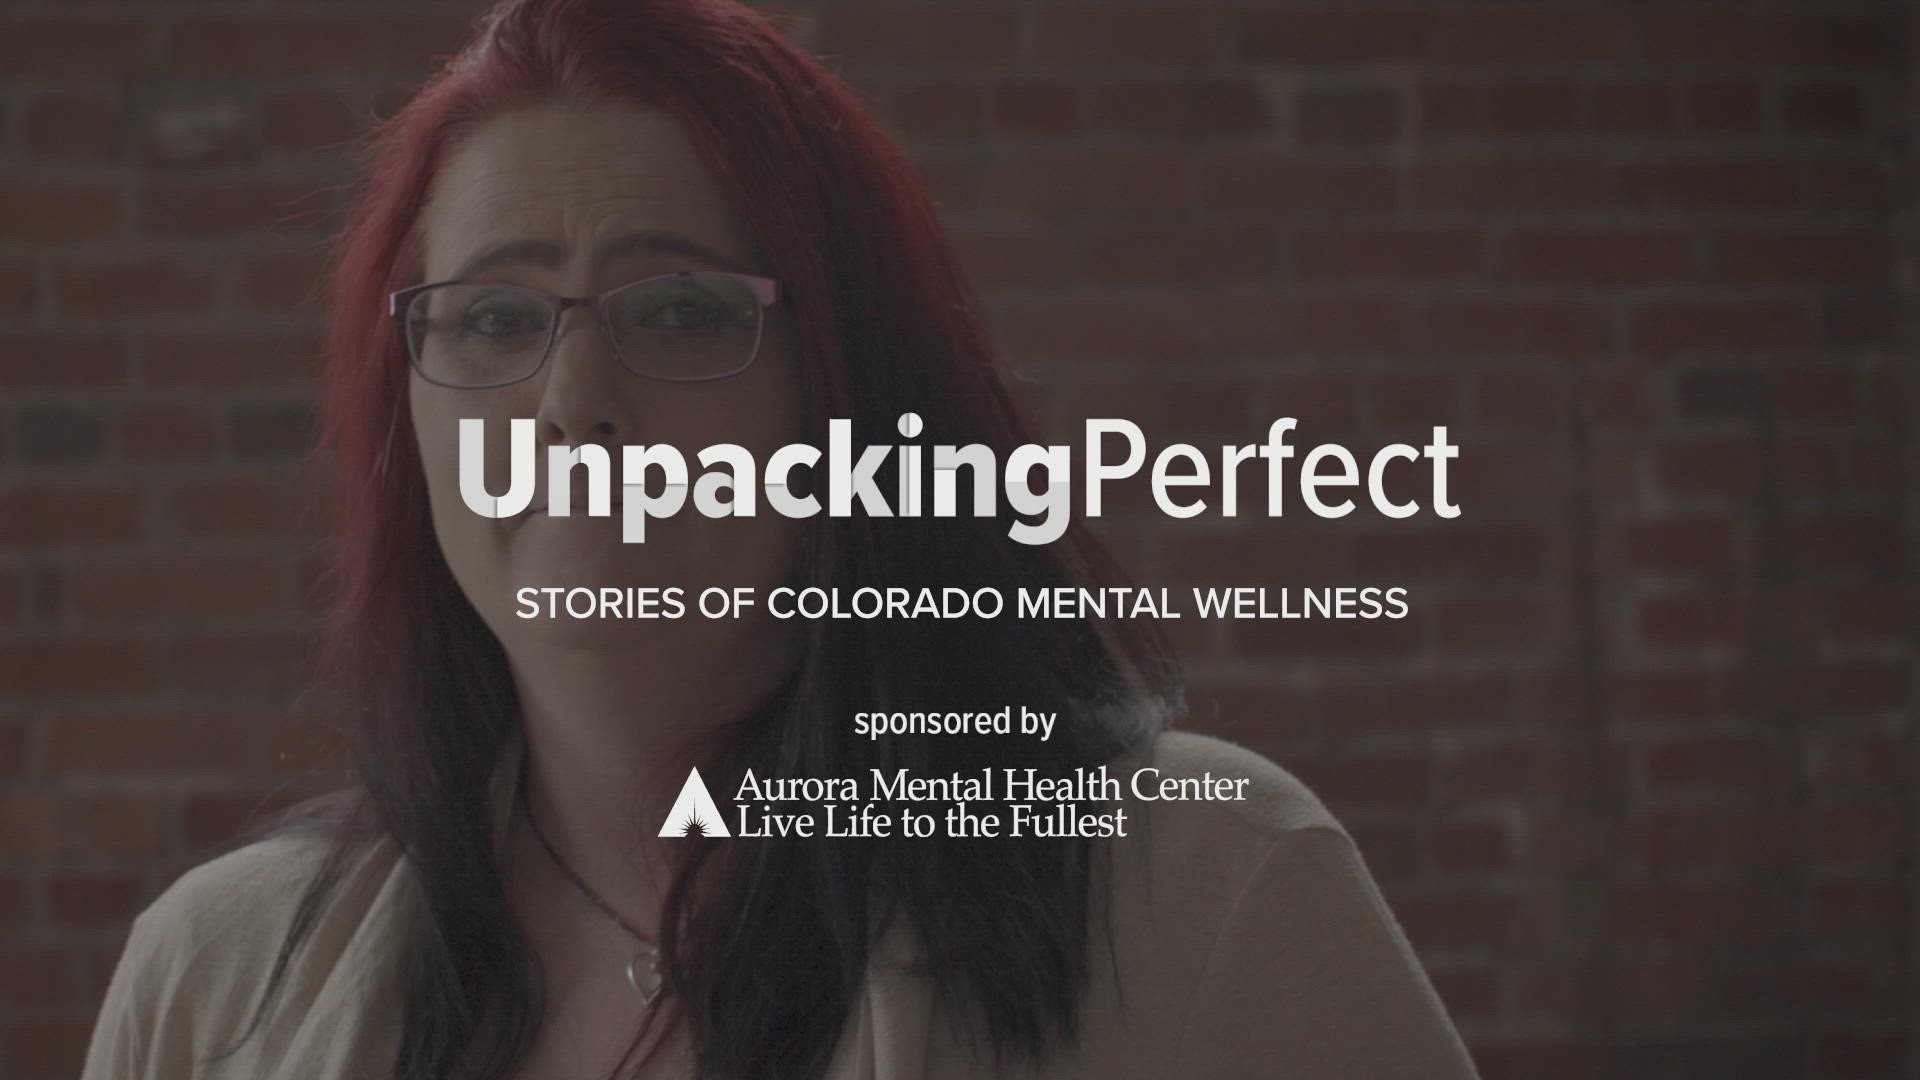 Shauna recently sat down with 9NEWS and Unpacking Perfect to share her story of mental wellness, and how she has pushed aside the ideals of perfection.